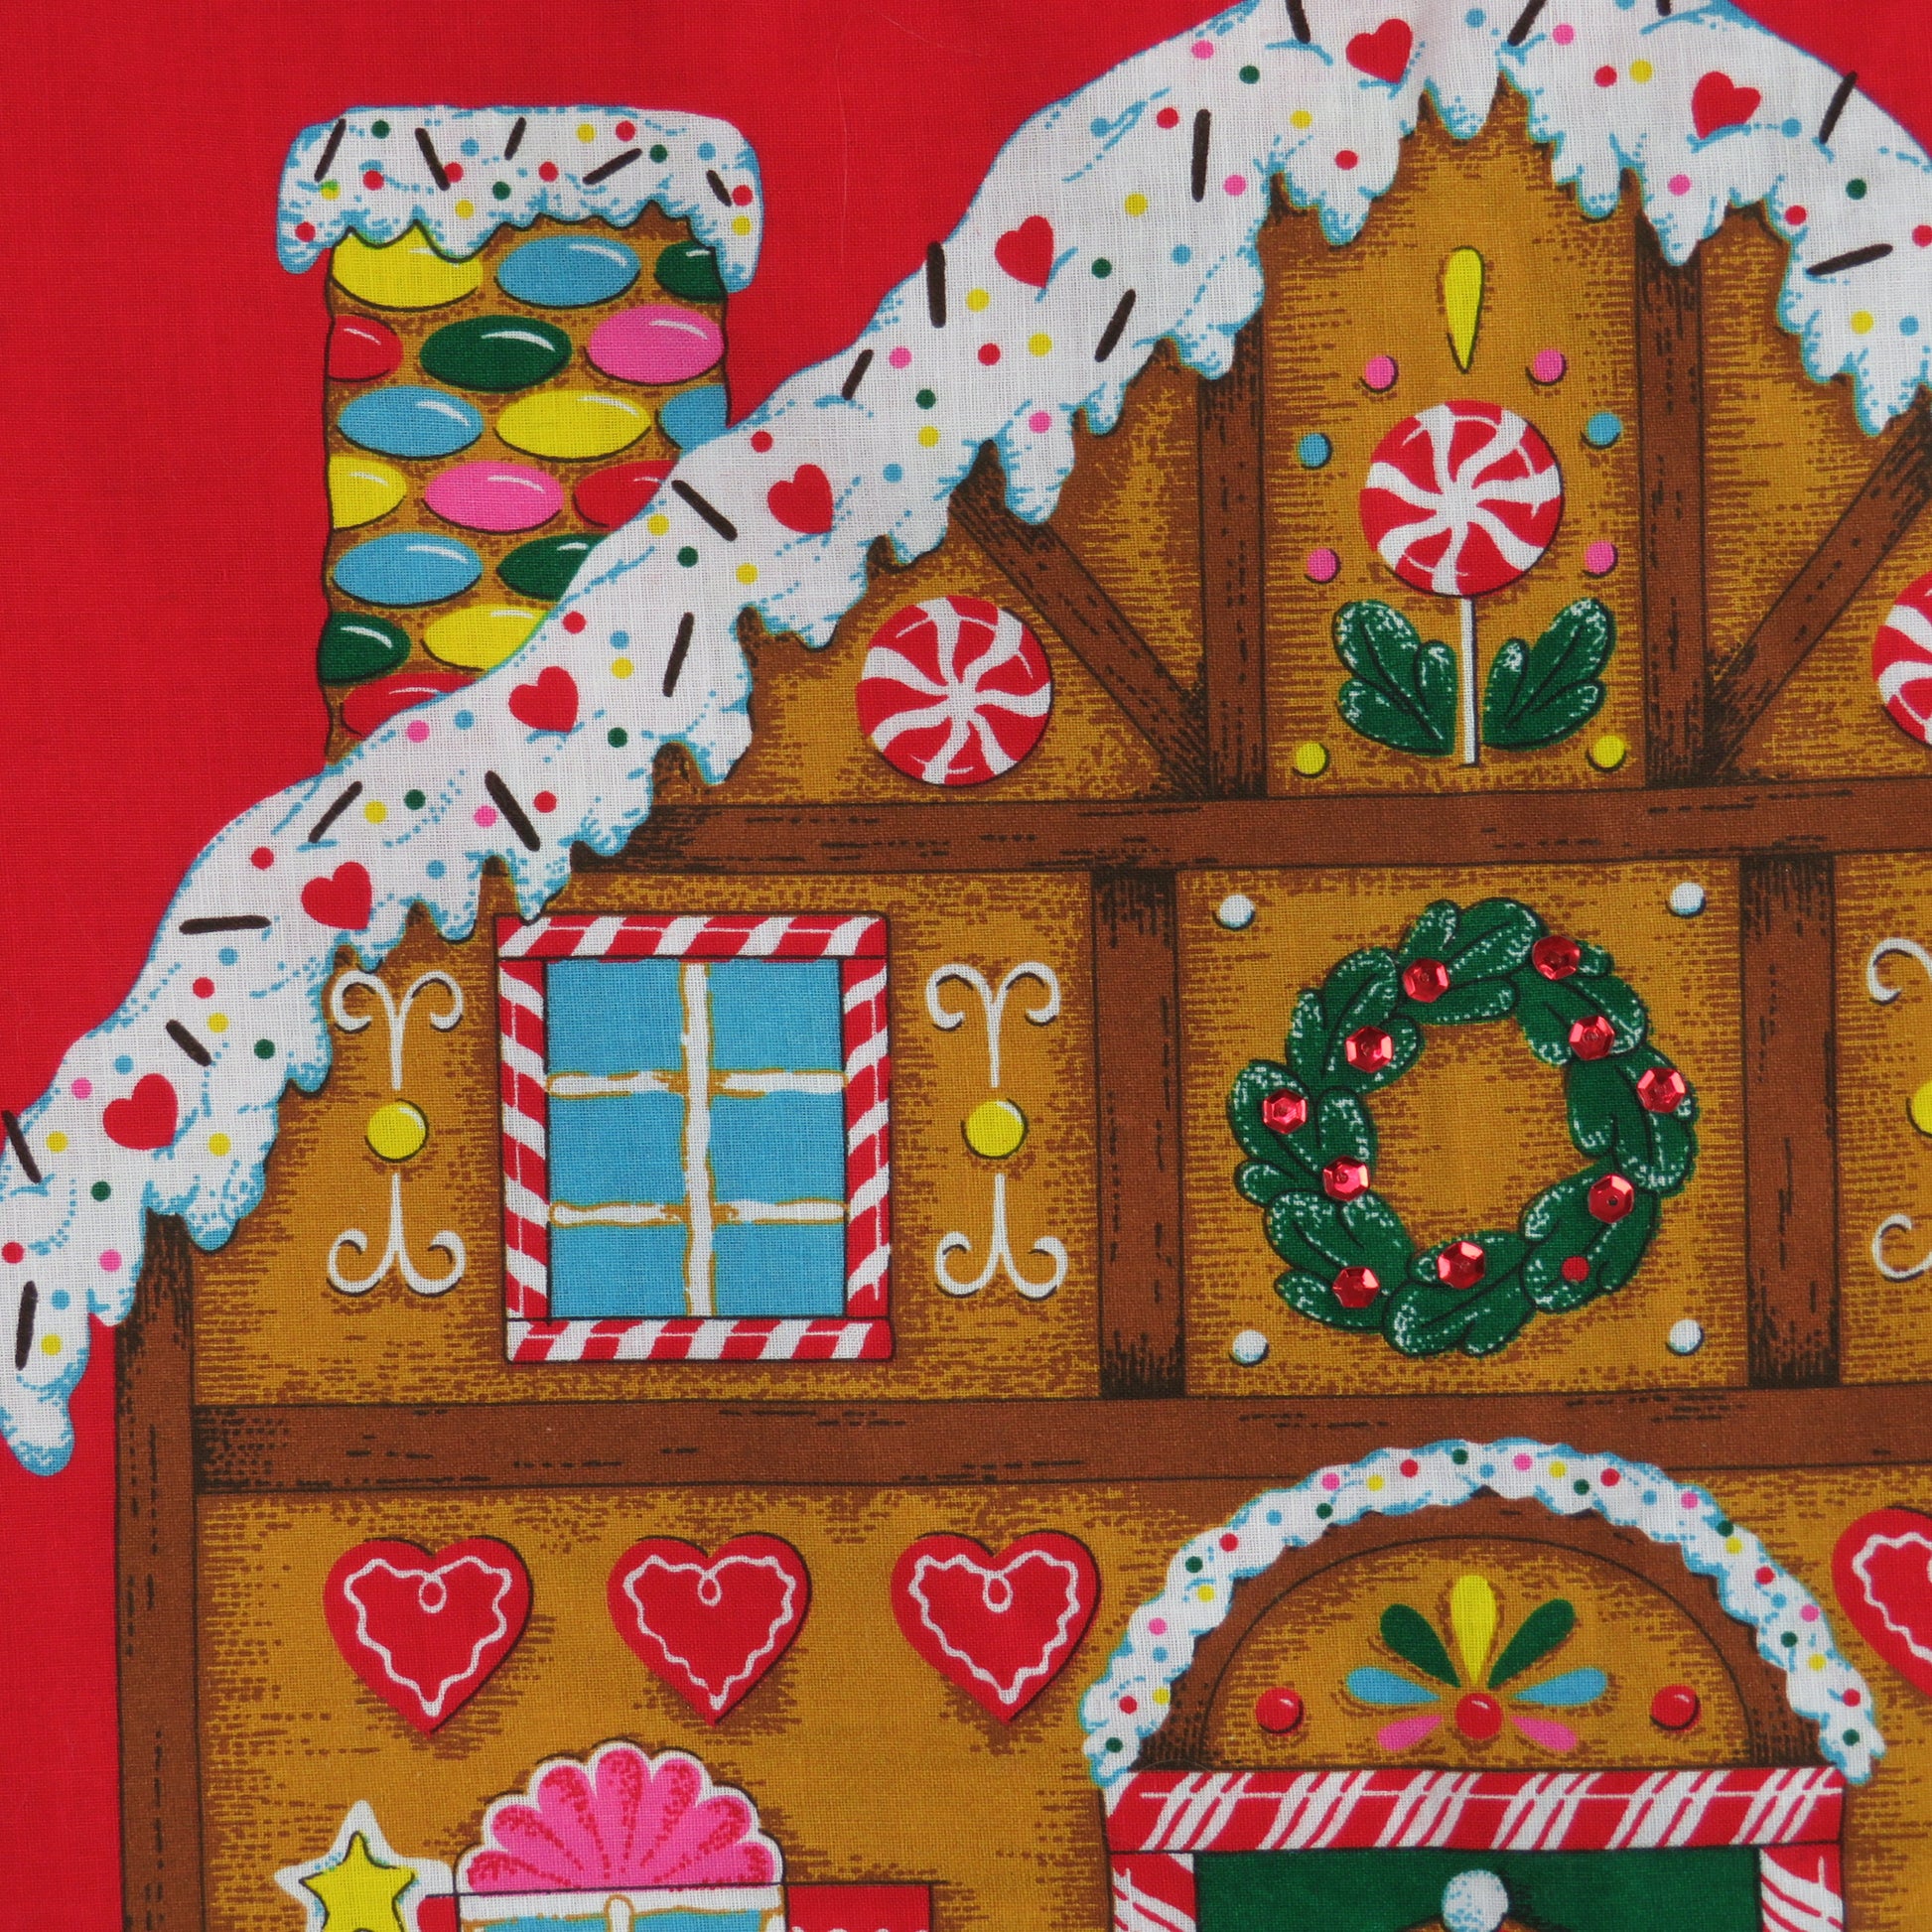 Vintage Gingerbread House Card Holder Merry Christmas Fabric Wall Hanging Holiday Decoration, Christmas Decoration - At Grandma's Table